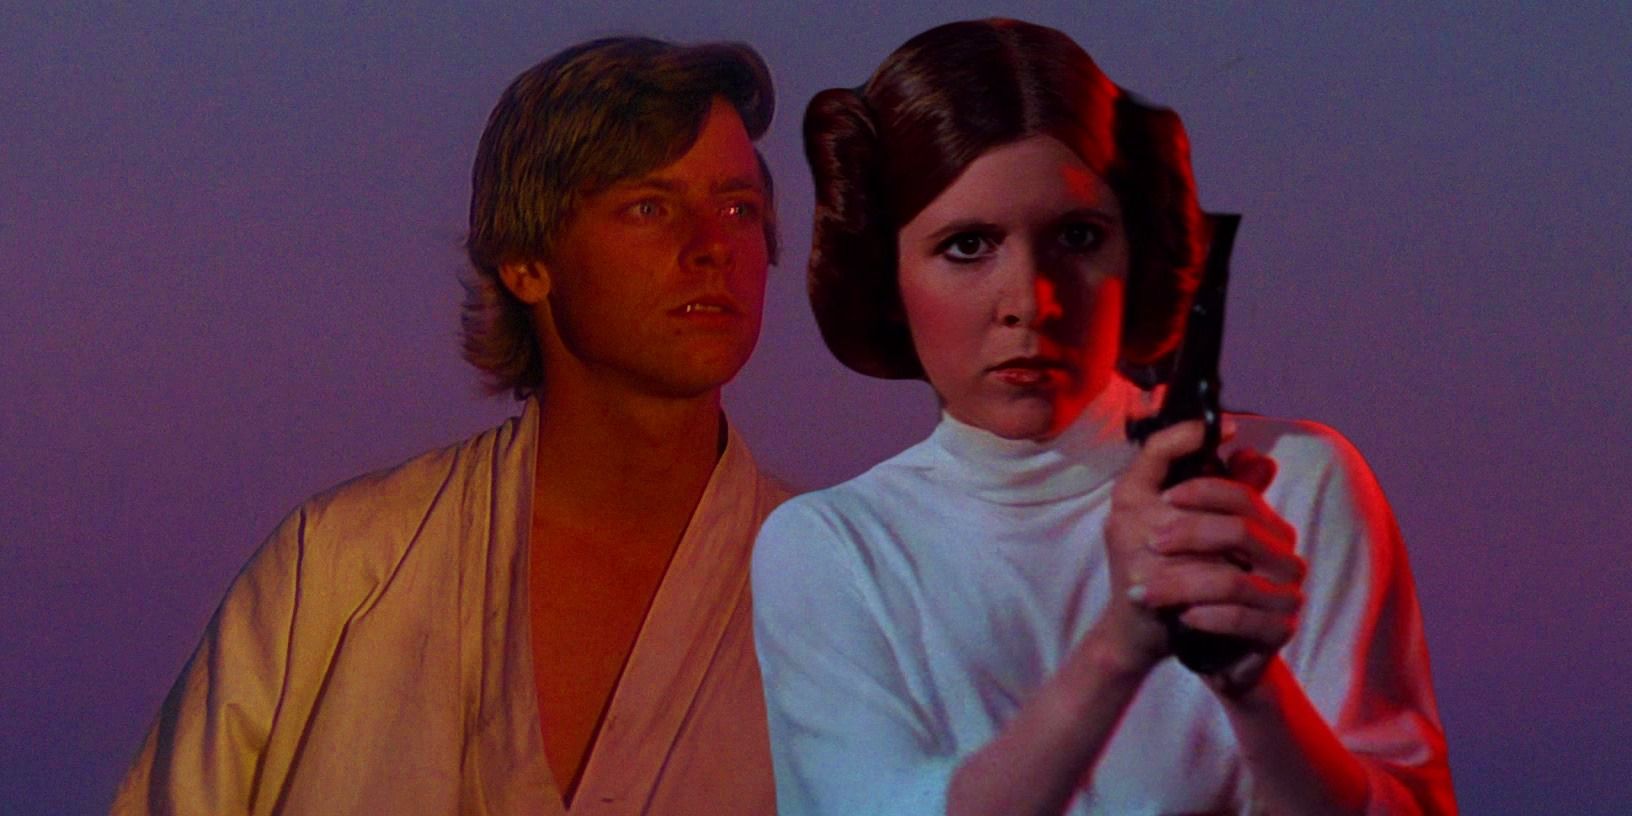 Luke stands looking off to the side on the left and Leia stands next to him holding a blaster 